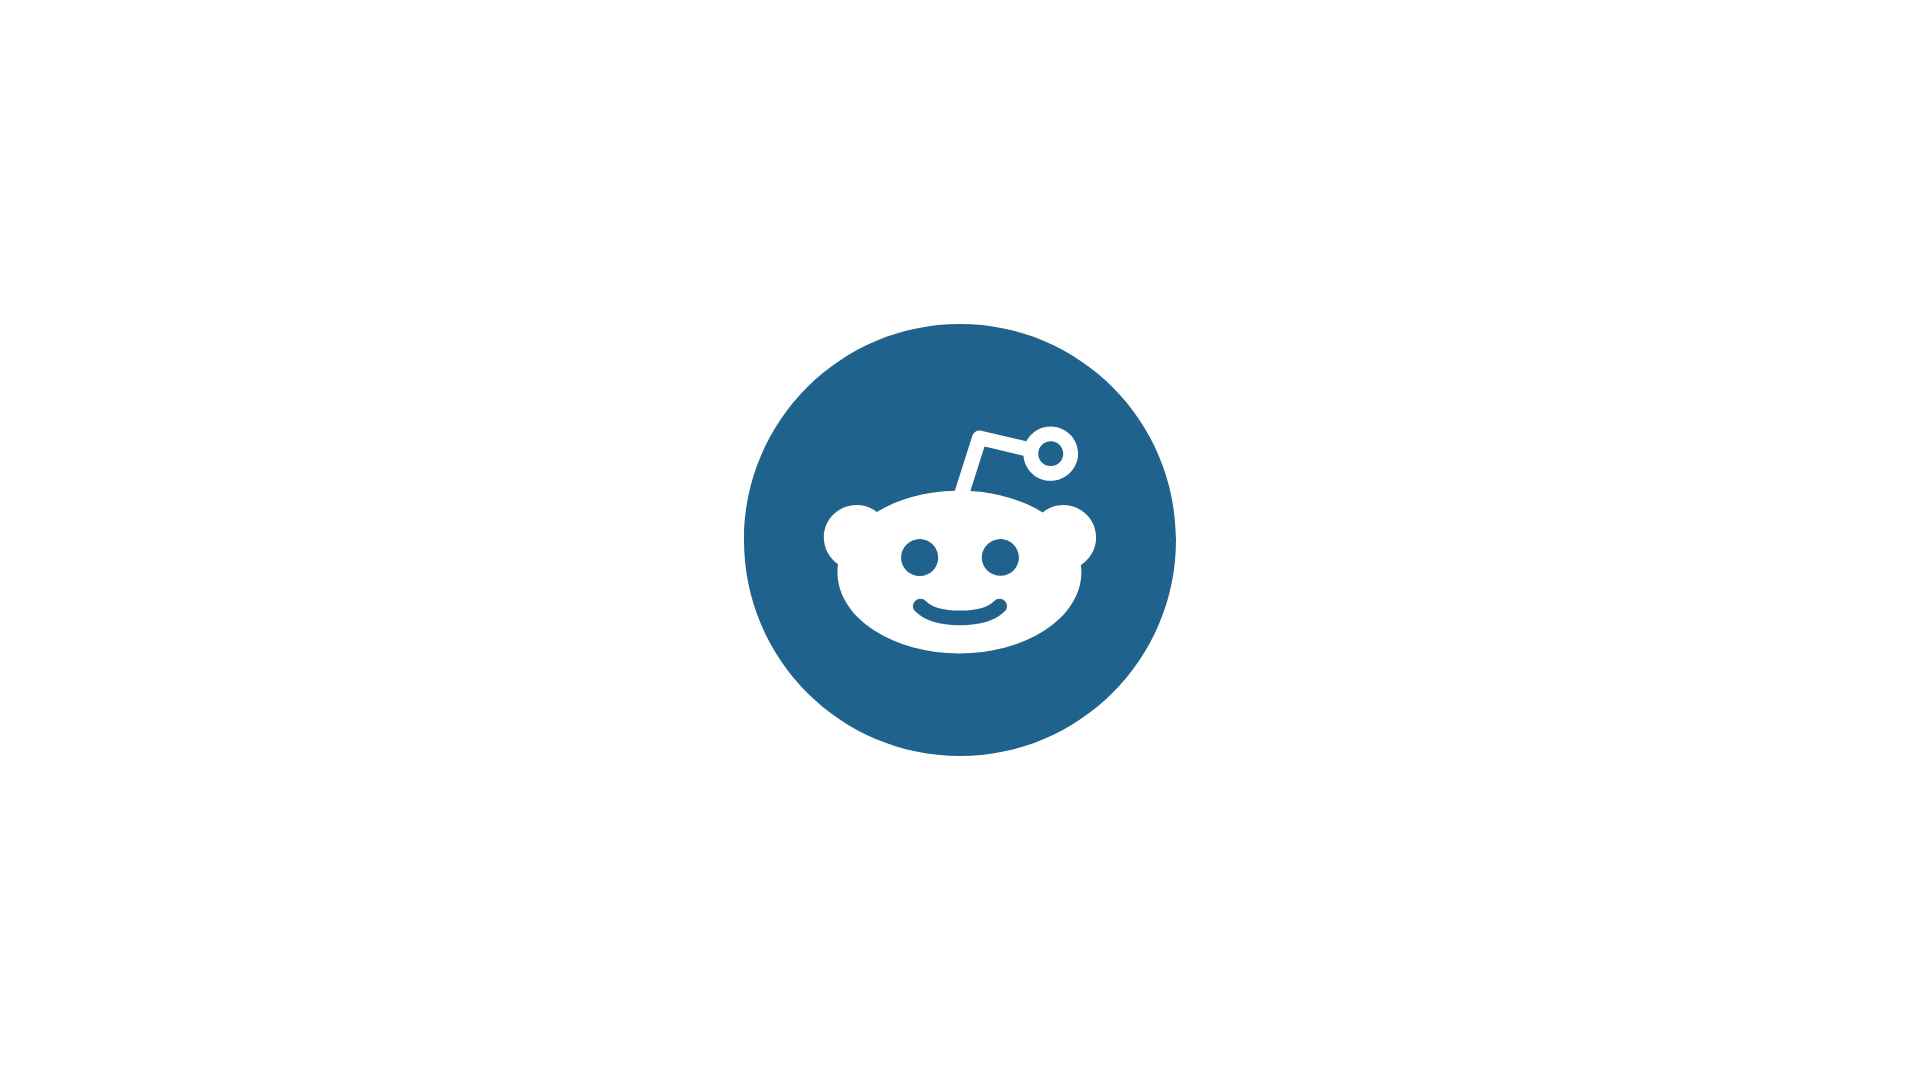 Are there any restrictions on the types of content that can be shared or discussed on Reddit?